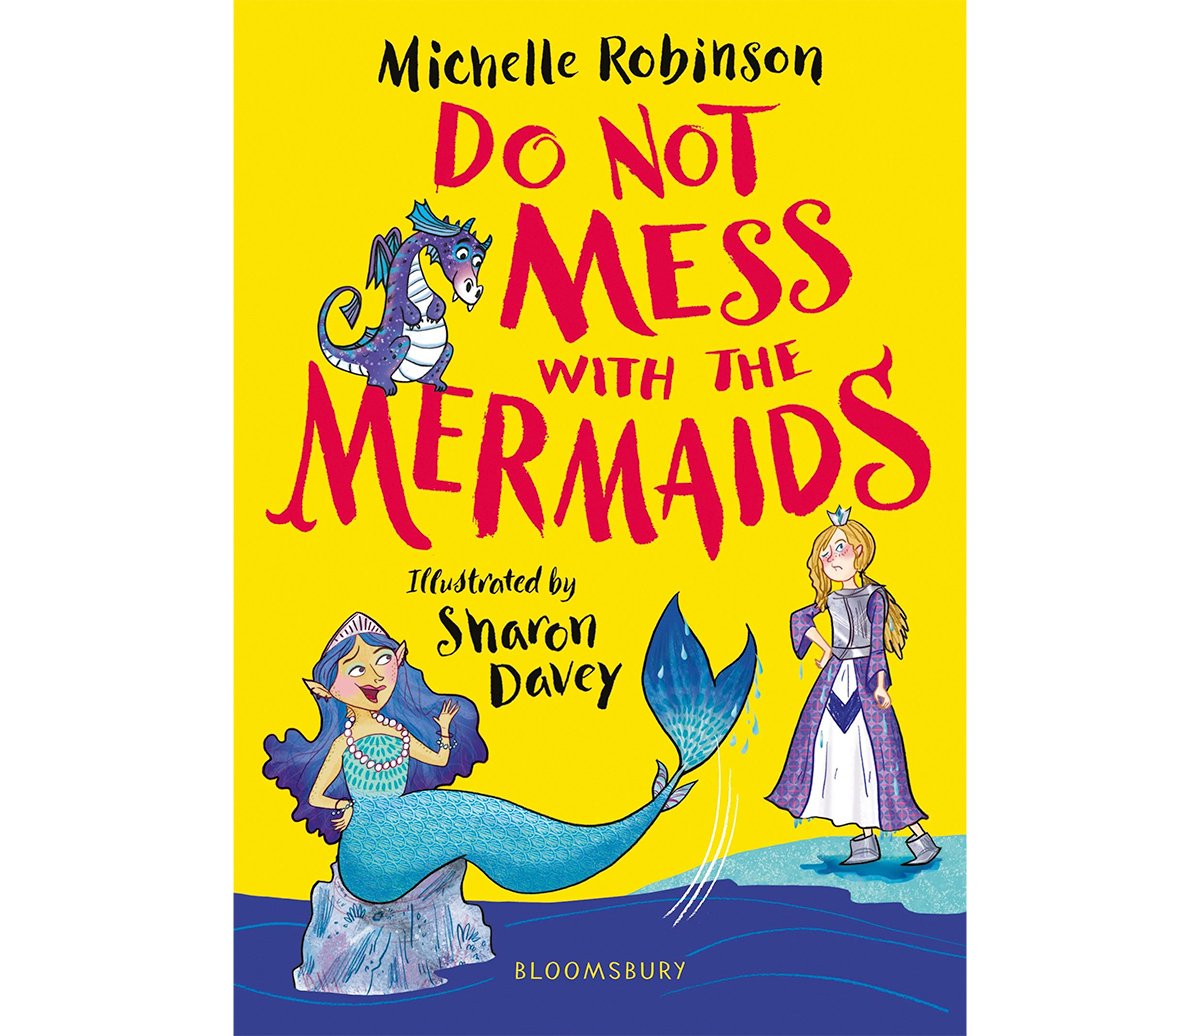 sharon-davey-do-not-mess-with-mermaids-cover.jpg